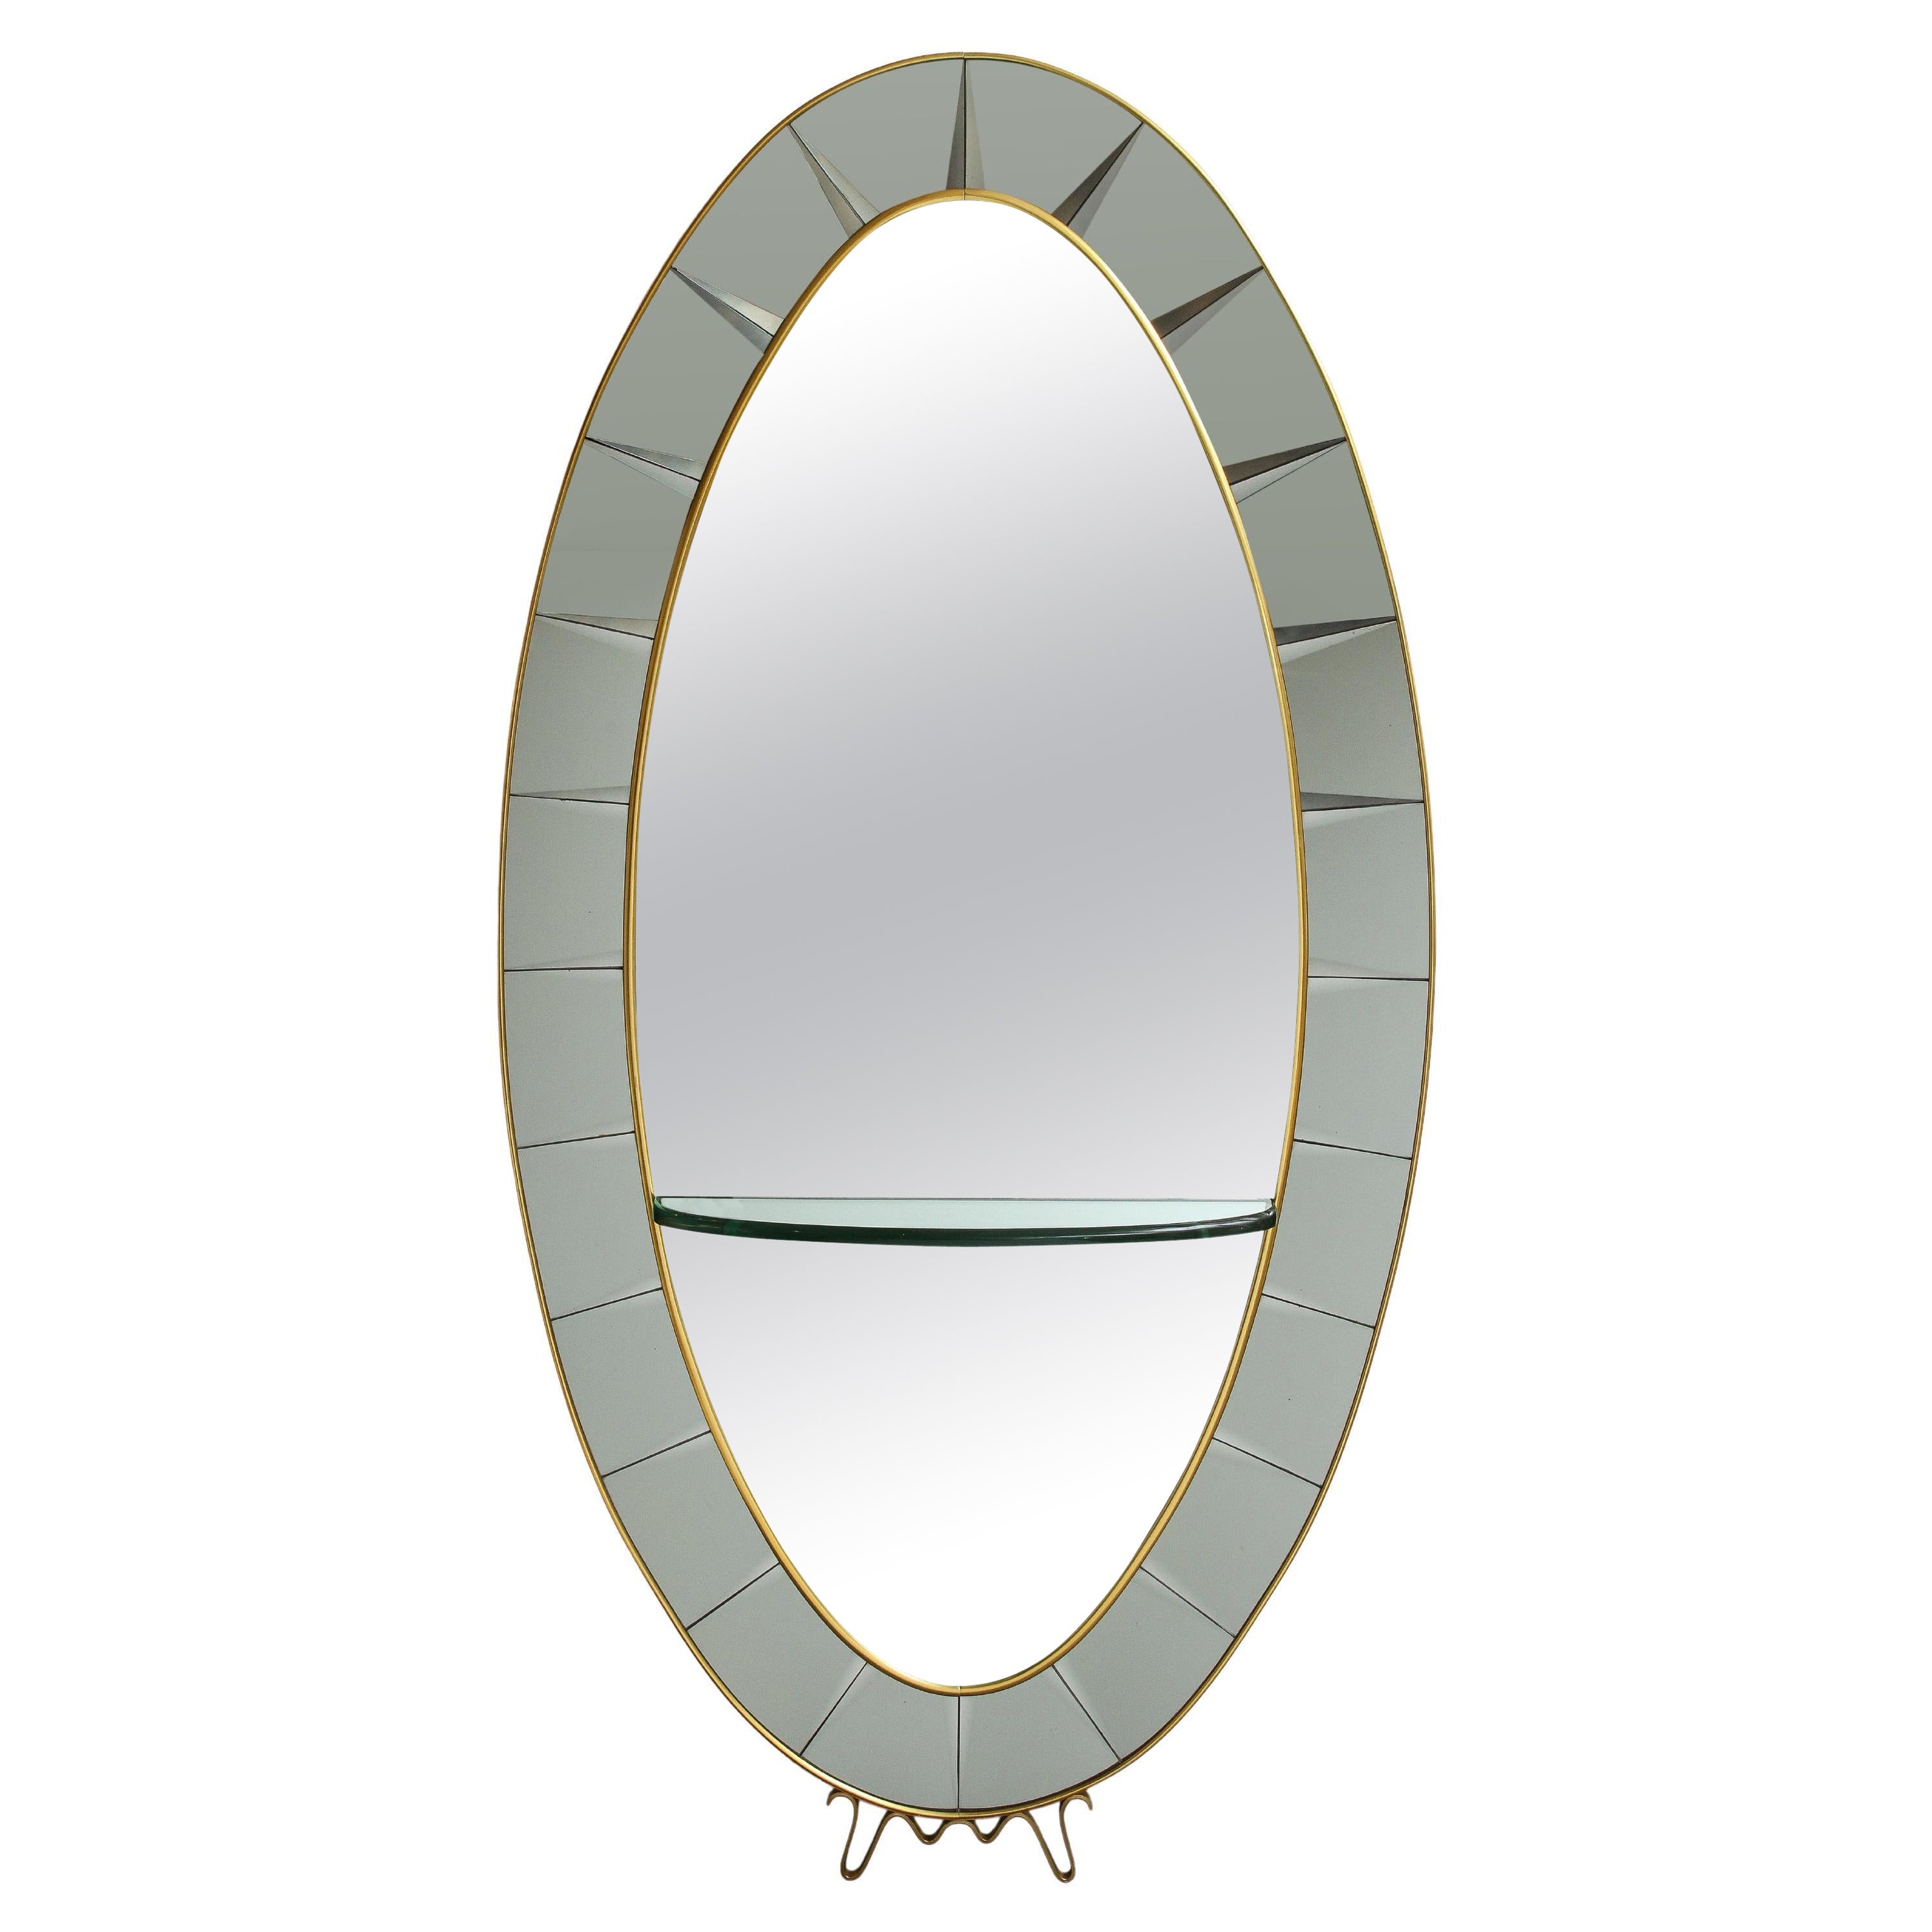 What are floor mirrors used for?